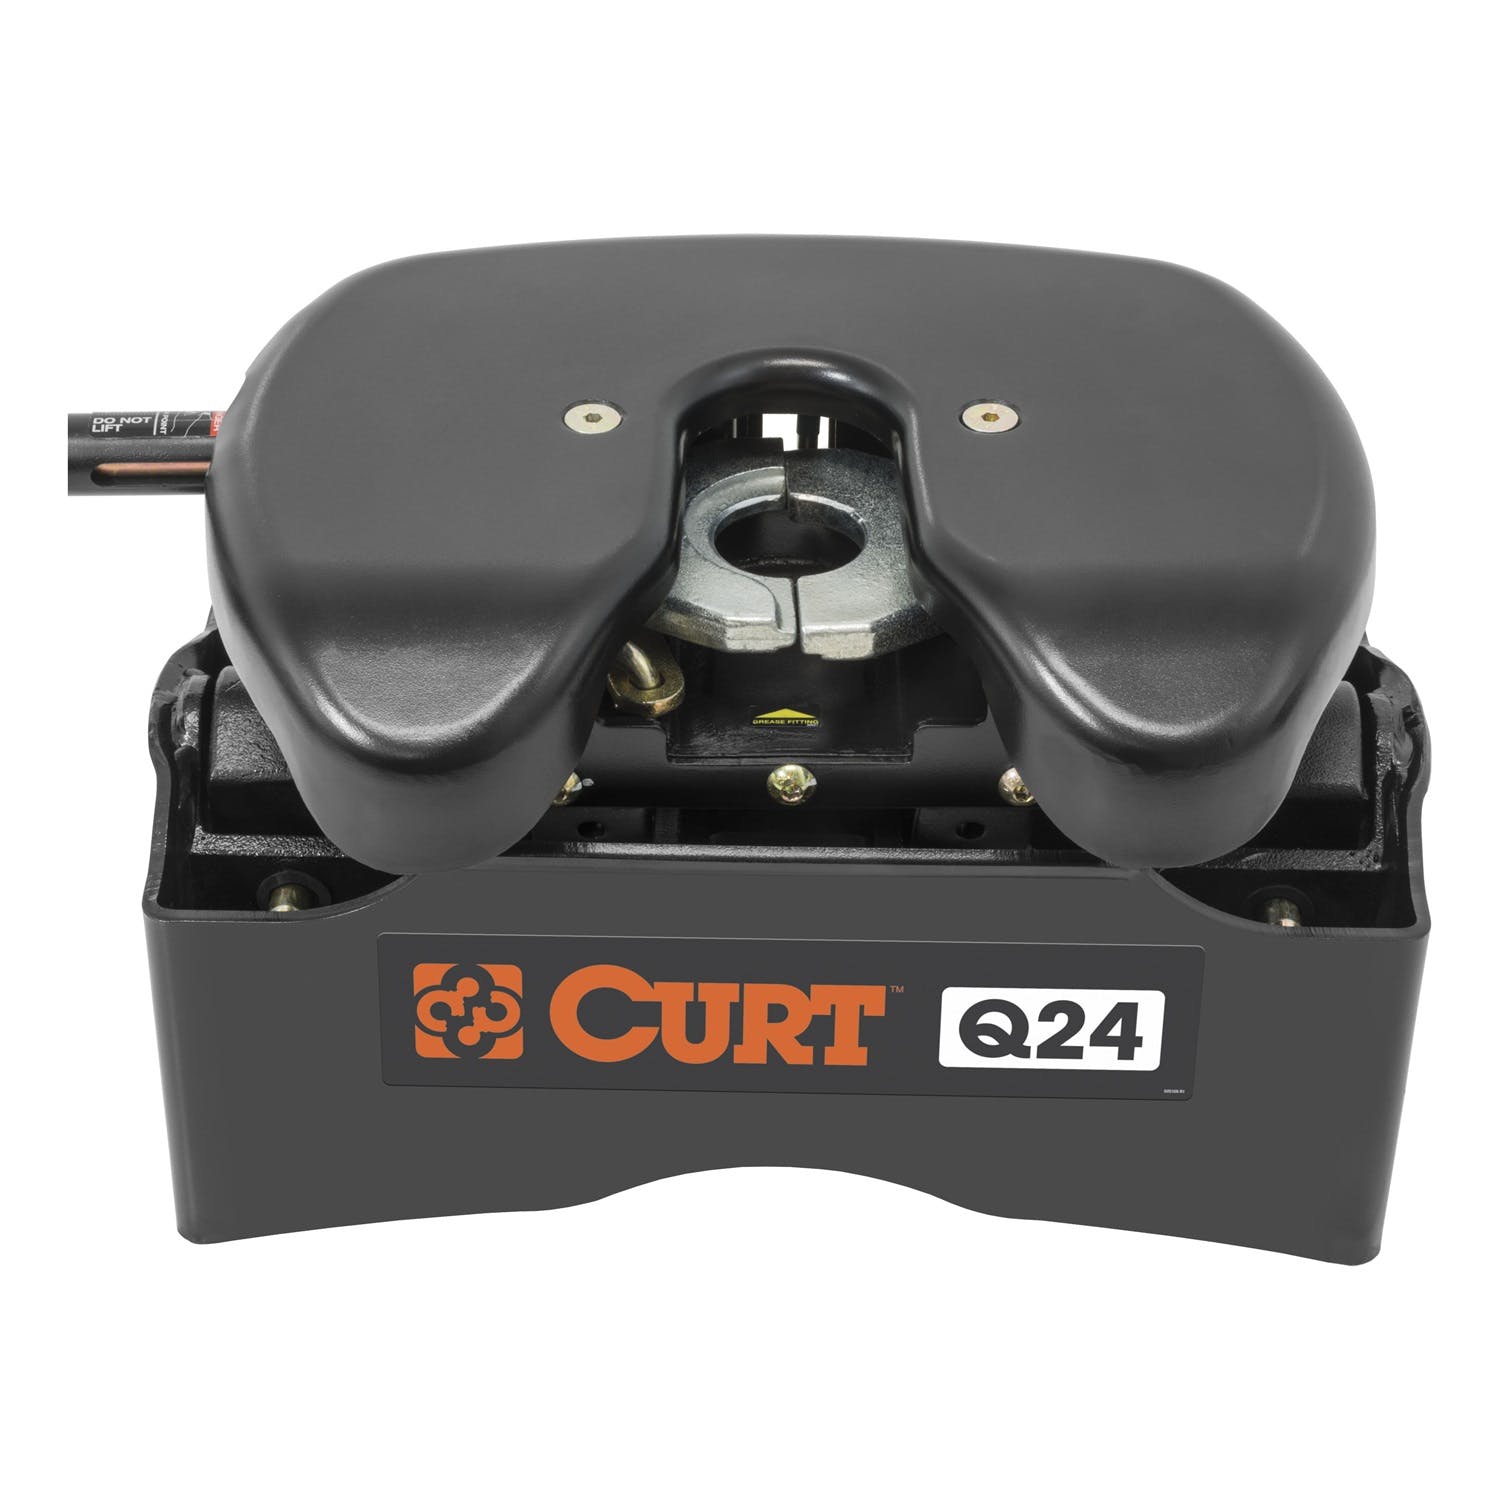 CURT 16047 Q24 5th Wheel Hitch, Select Ram 2500, 3500, 8' Bed Puck System